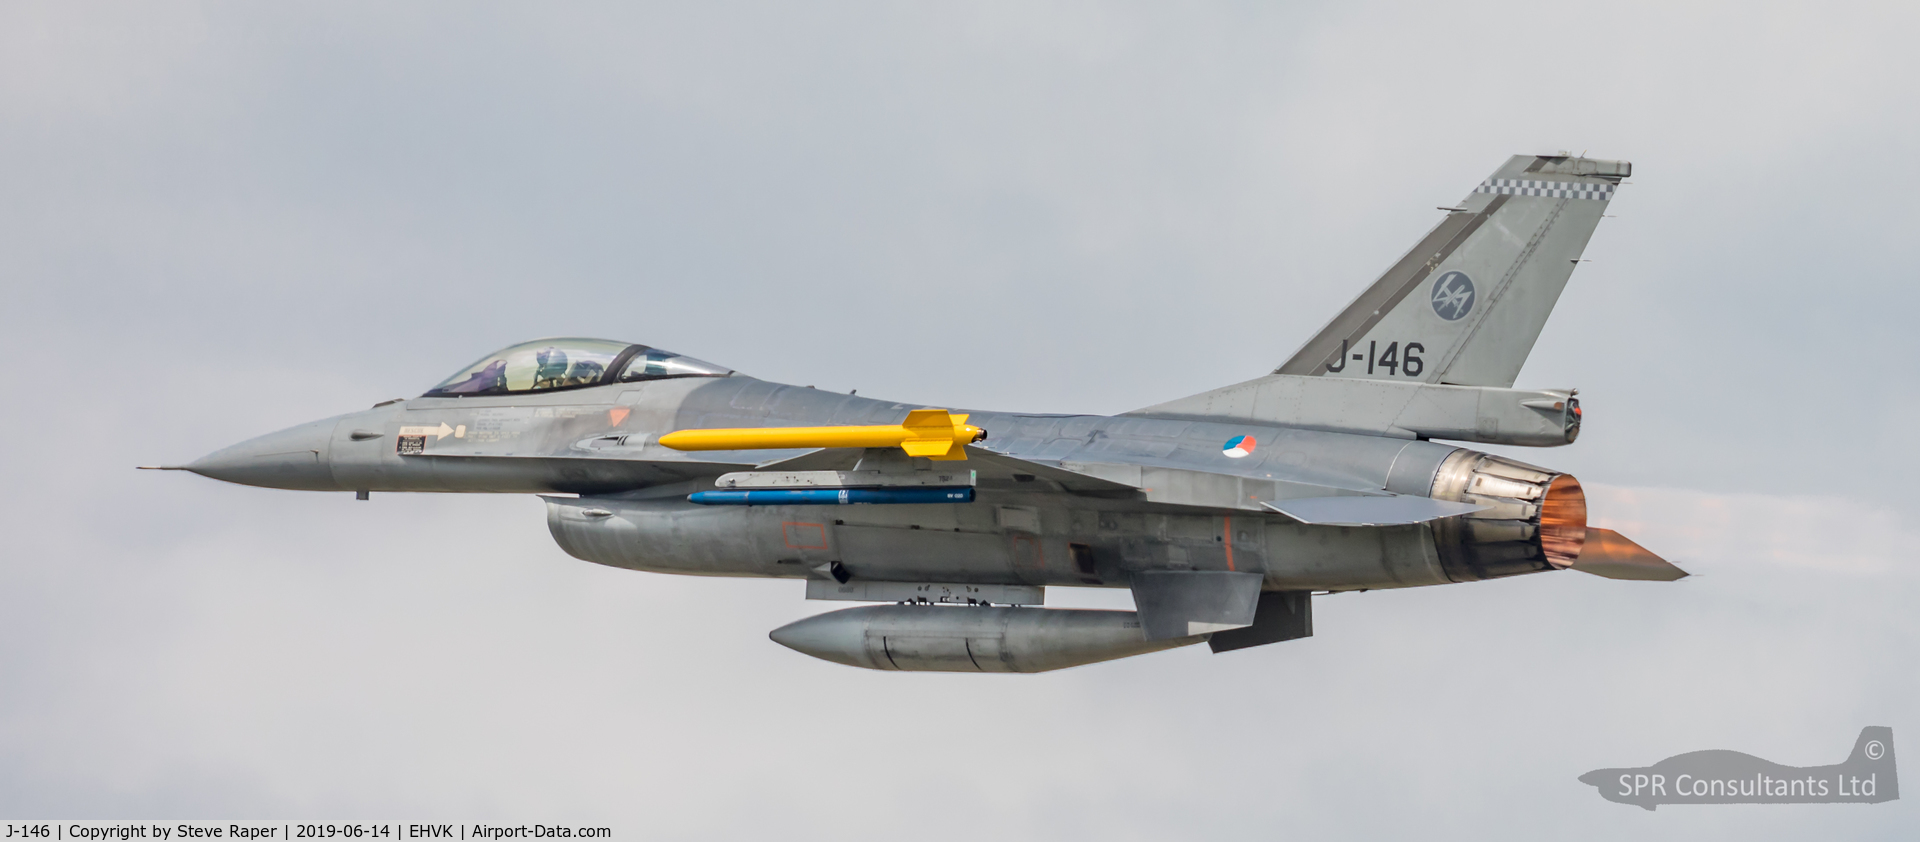 J-146, 1985 Fokker F-16AM Fighting Falcon C/N 6D-136, Royal Netherlands Air Force Base Volkel air day 14 June 2019